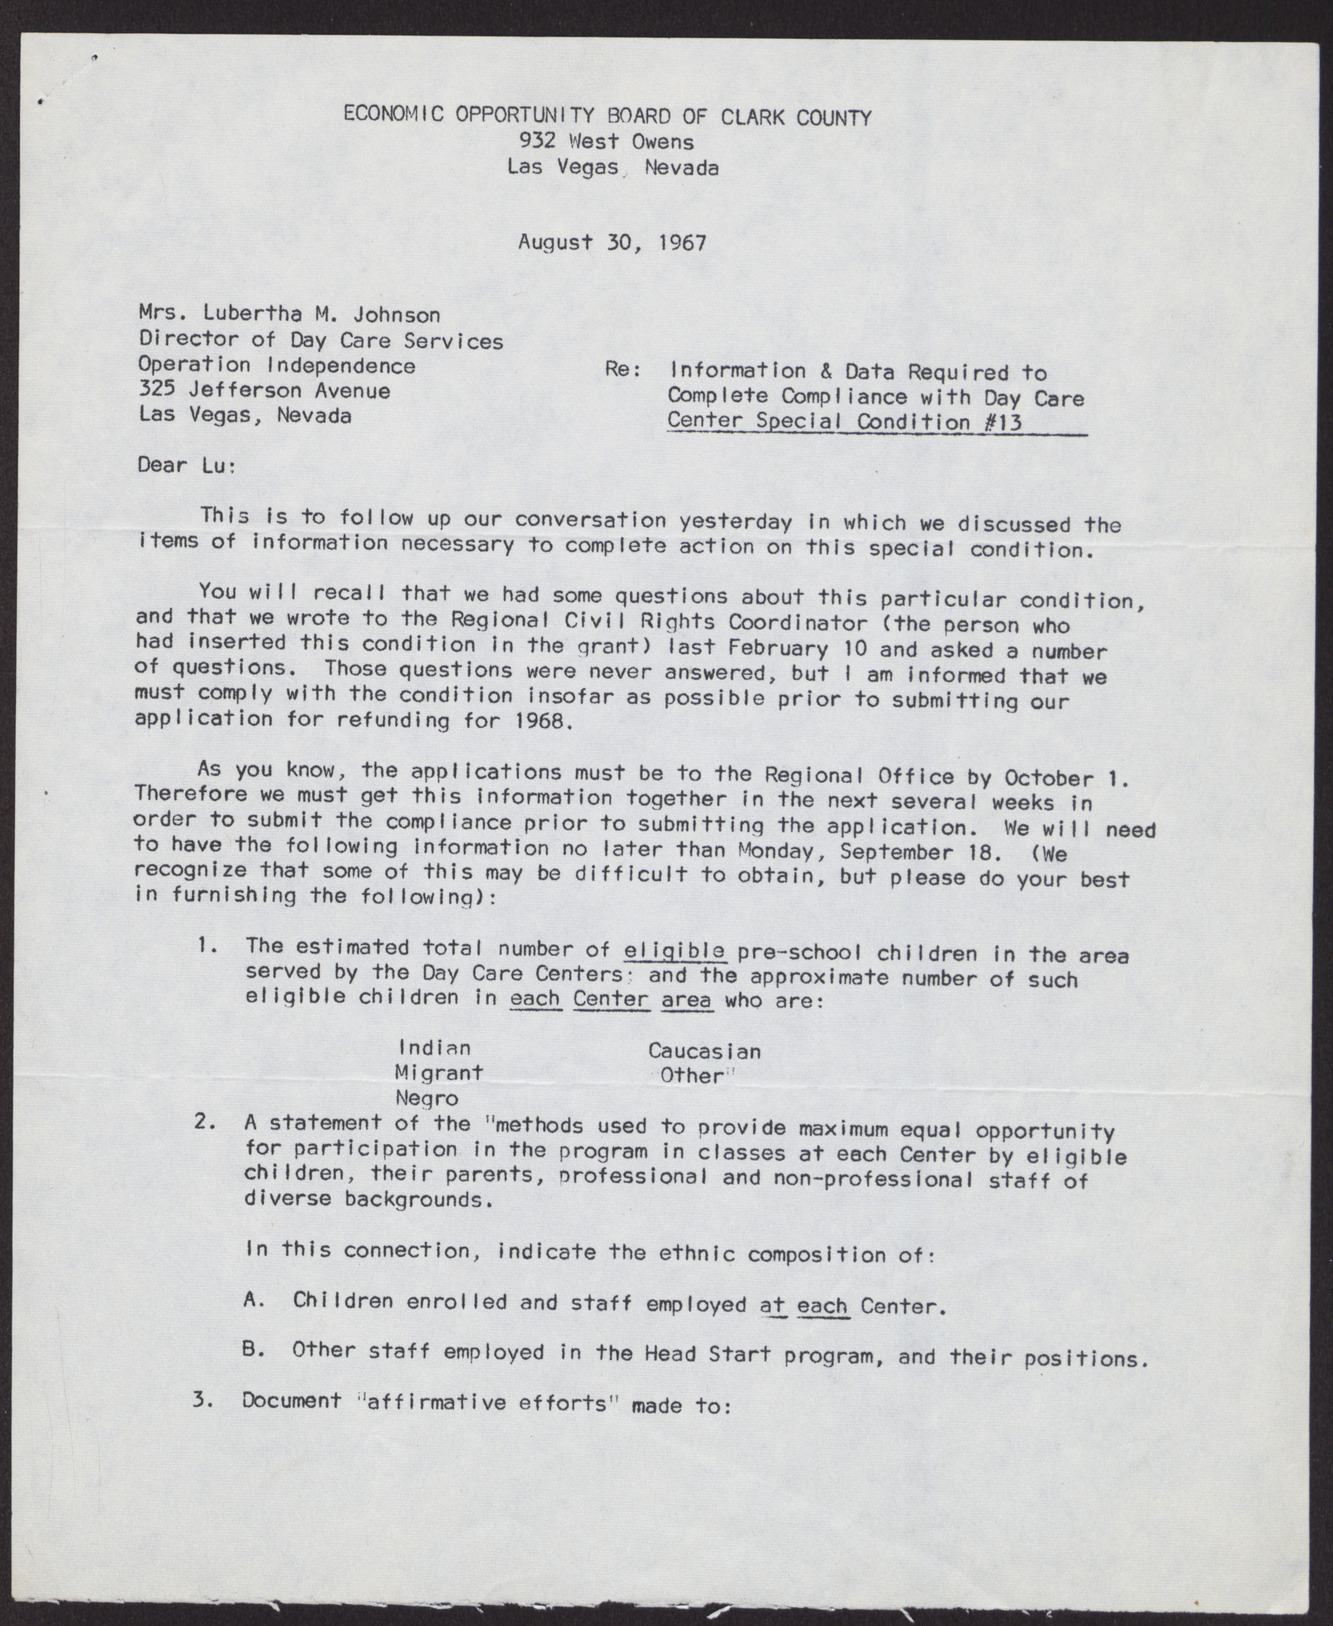 Letter to Mrs. Lubertha M. Johnson from W. F. Cottrell (3 pages), August 30, 1967